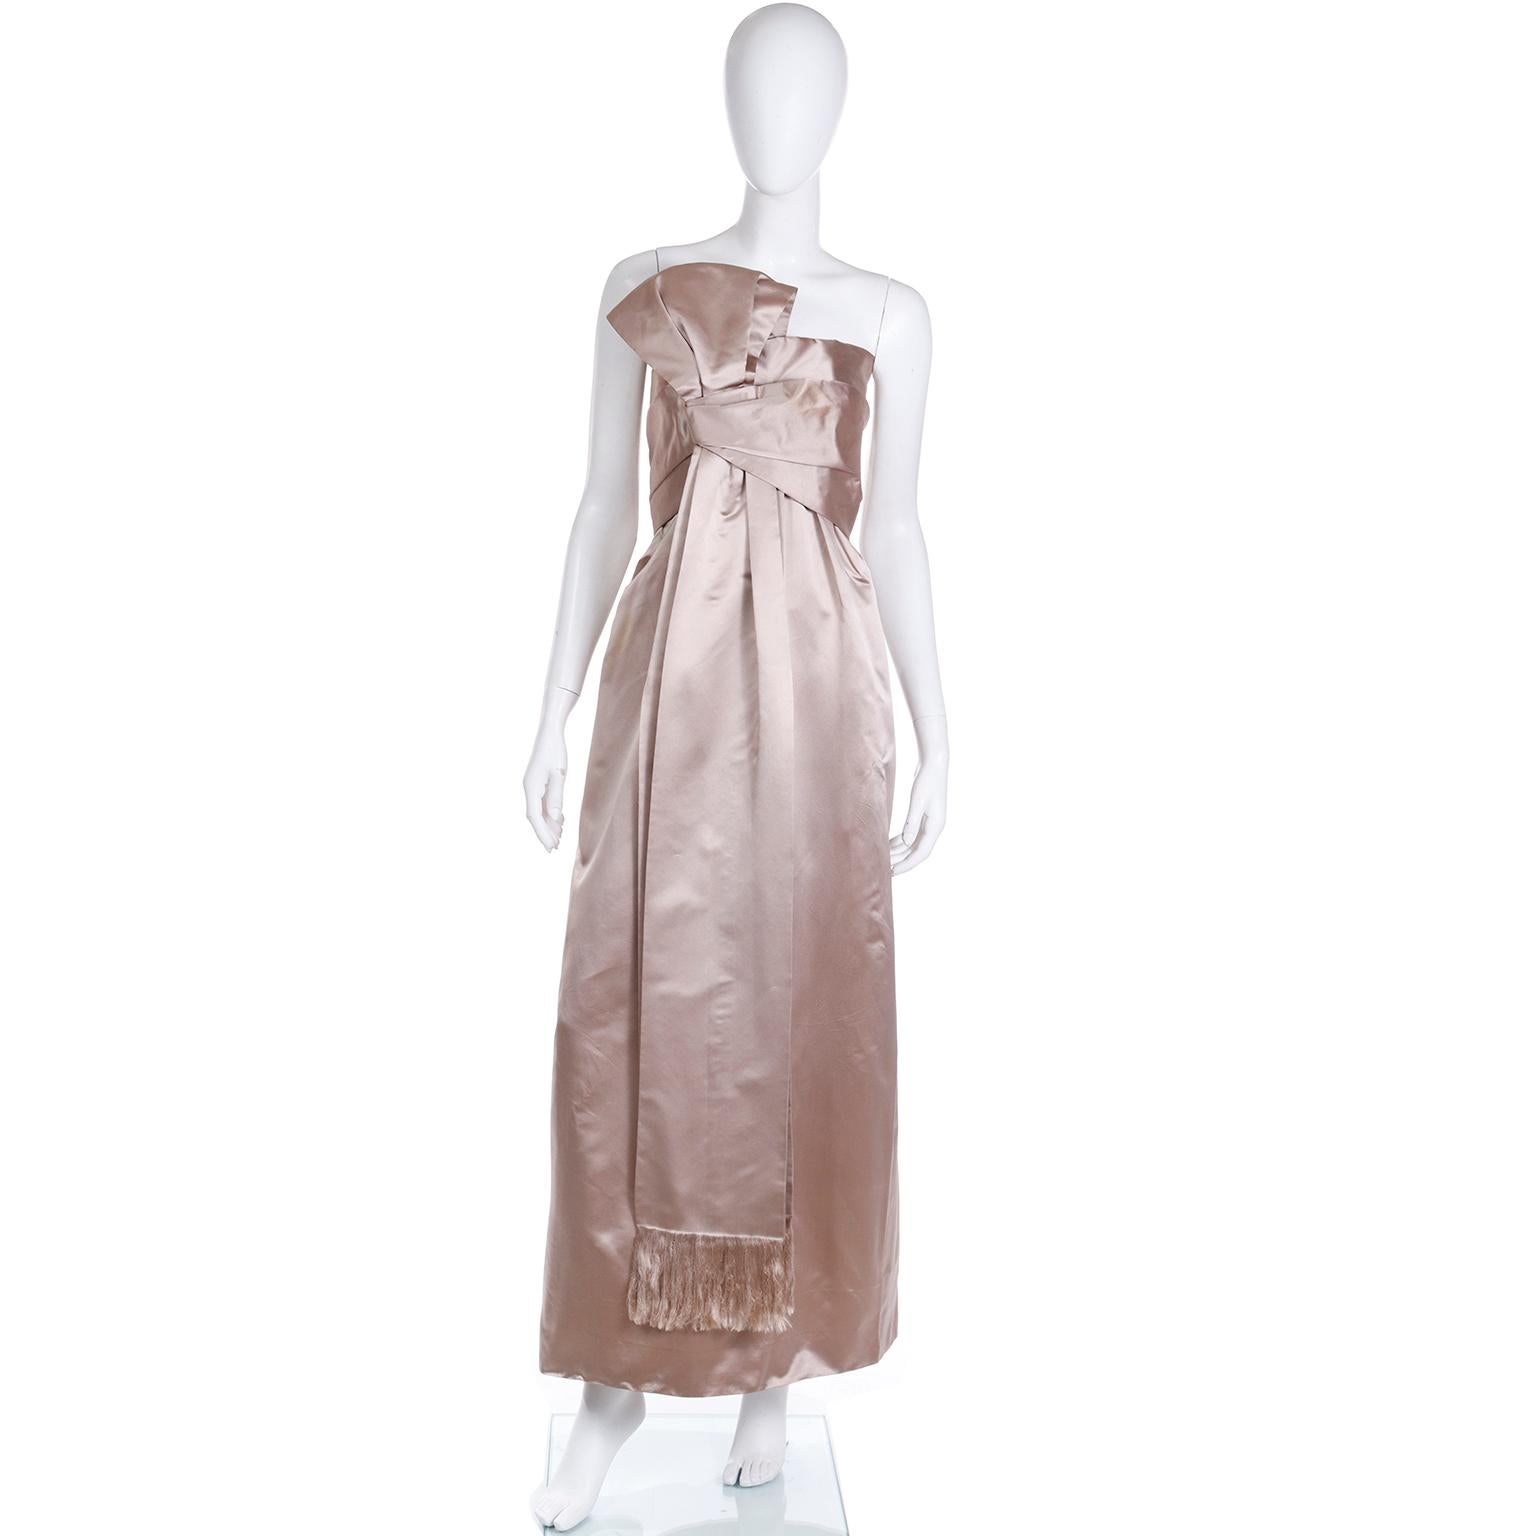 We are so happy to be able to offer this very rare, vintage 1950's strapless evening gown from Christian Dior in a pale taupe silk satin. This incredible dress has lovely tucks and gathers and a fringed sash that loops into a bow and the bodice and